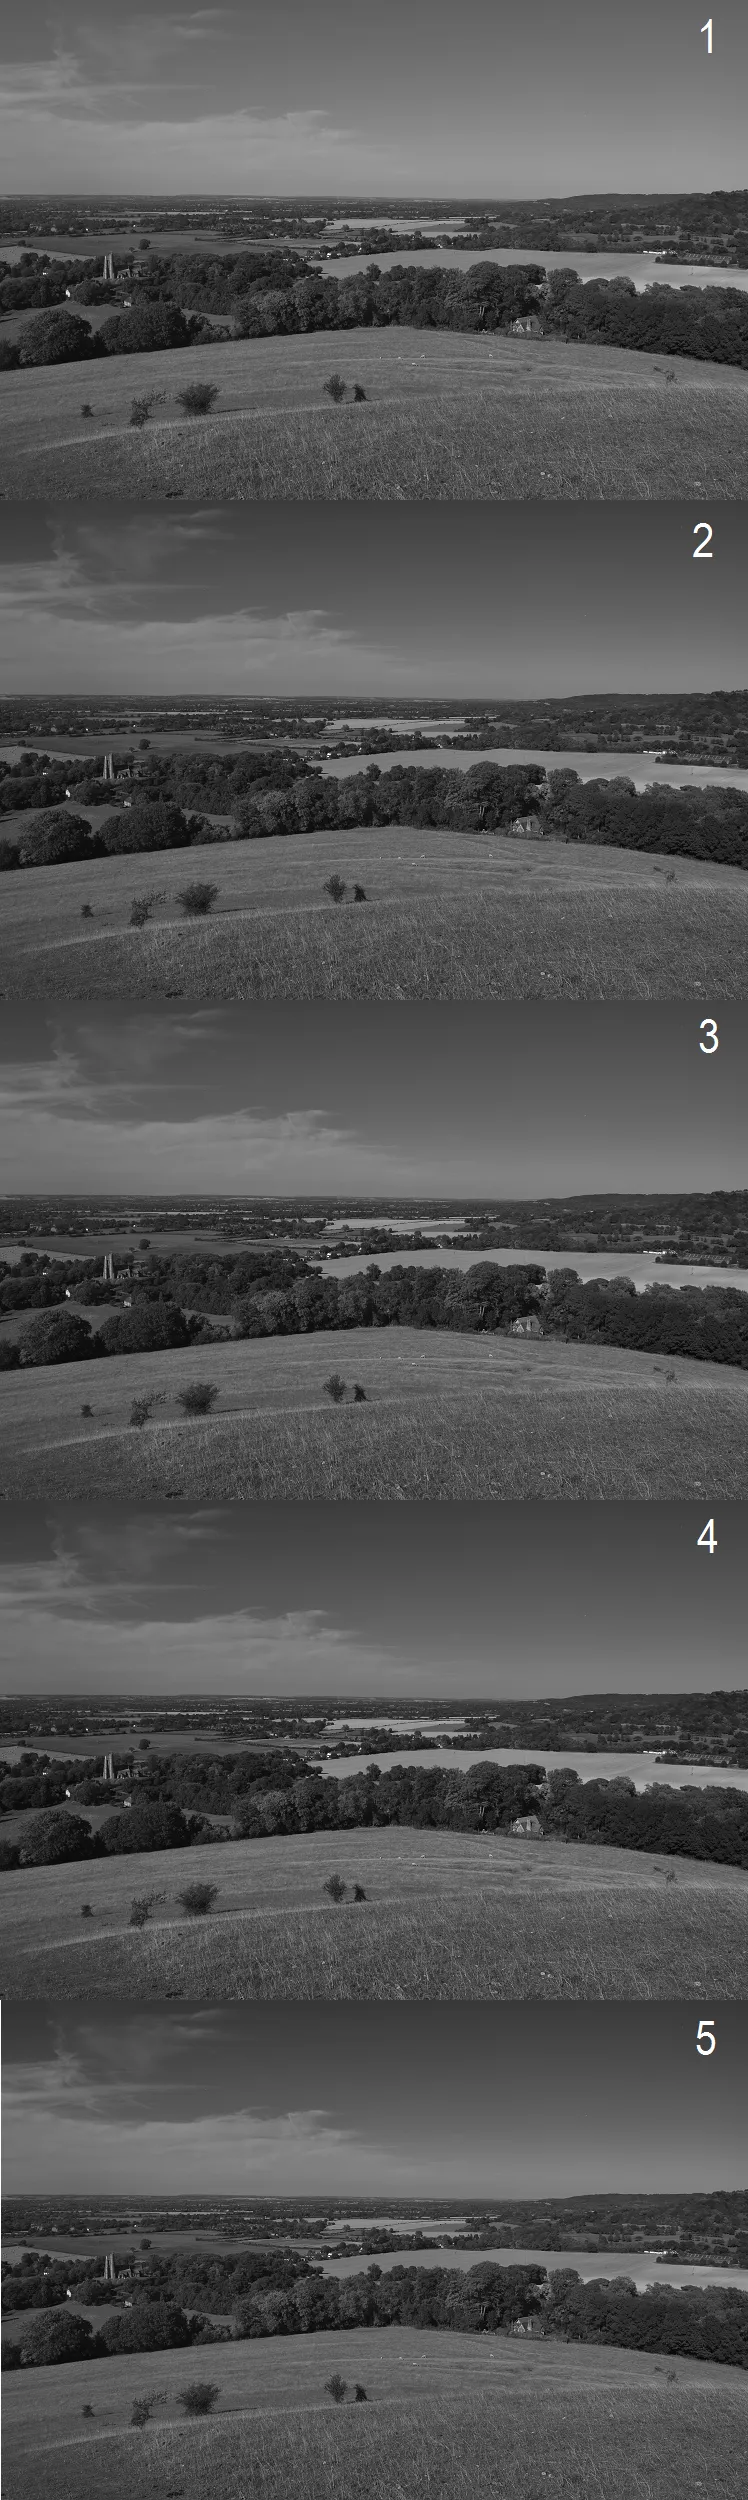 Nikon D5300 pictures with monochrome effects, Chiltern Hill in UK